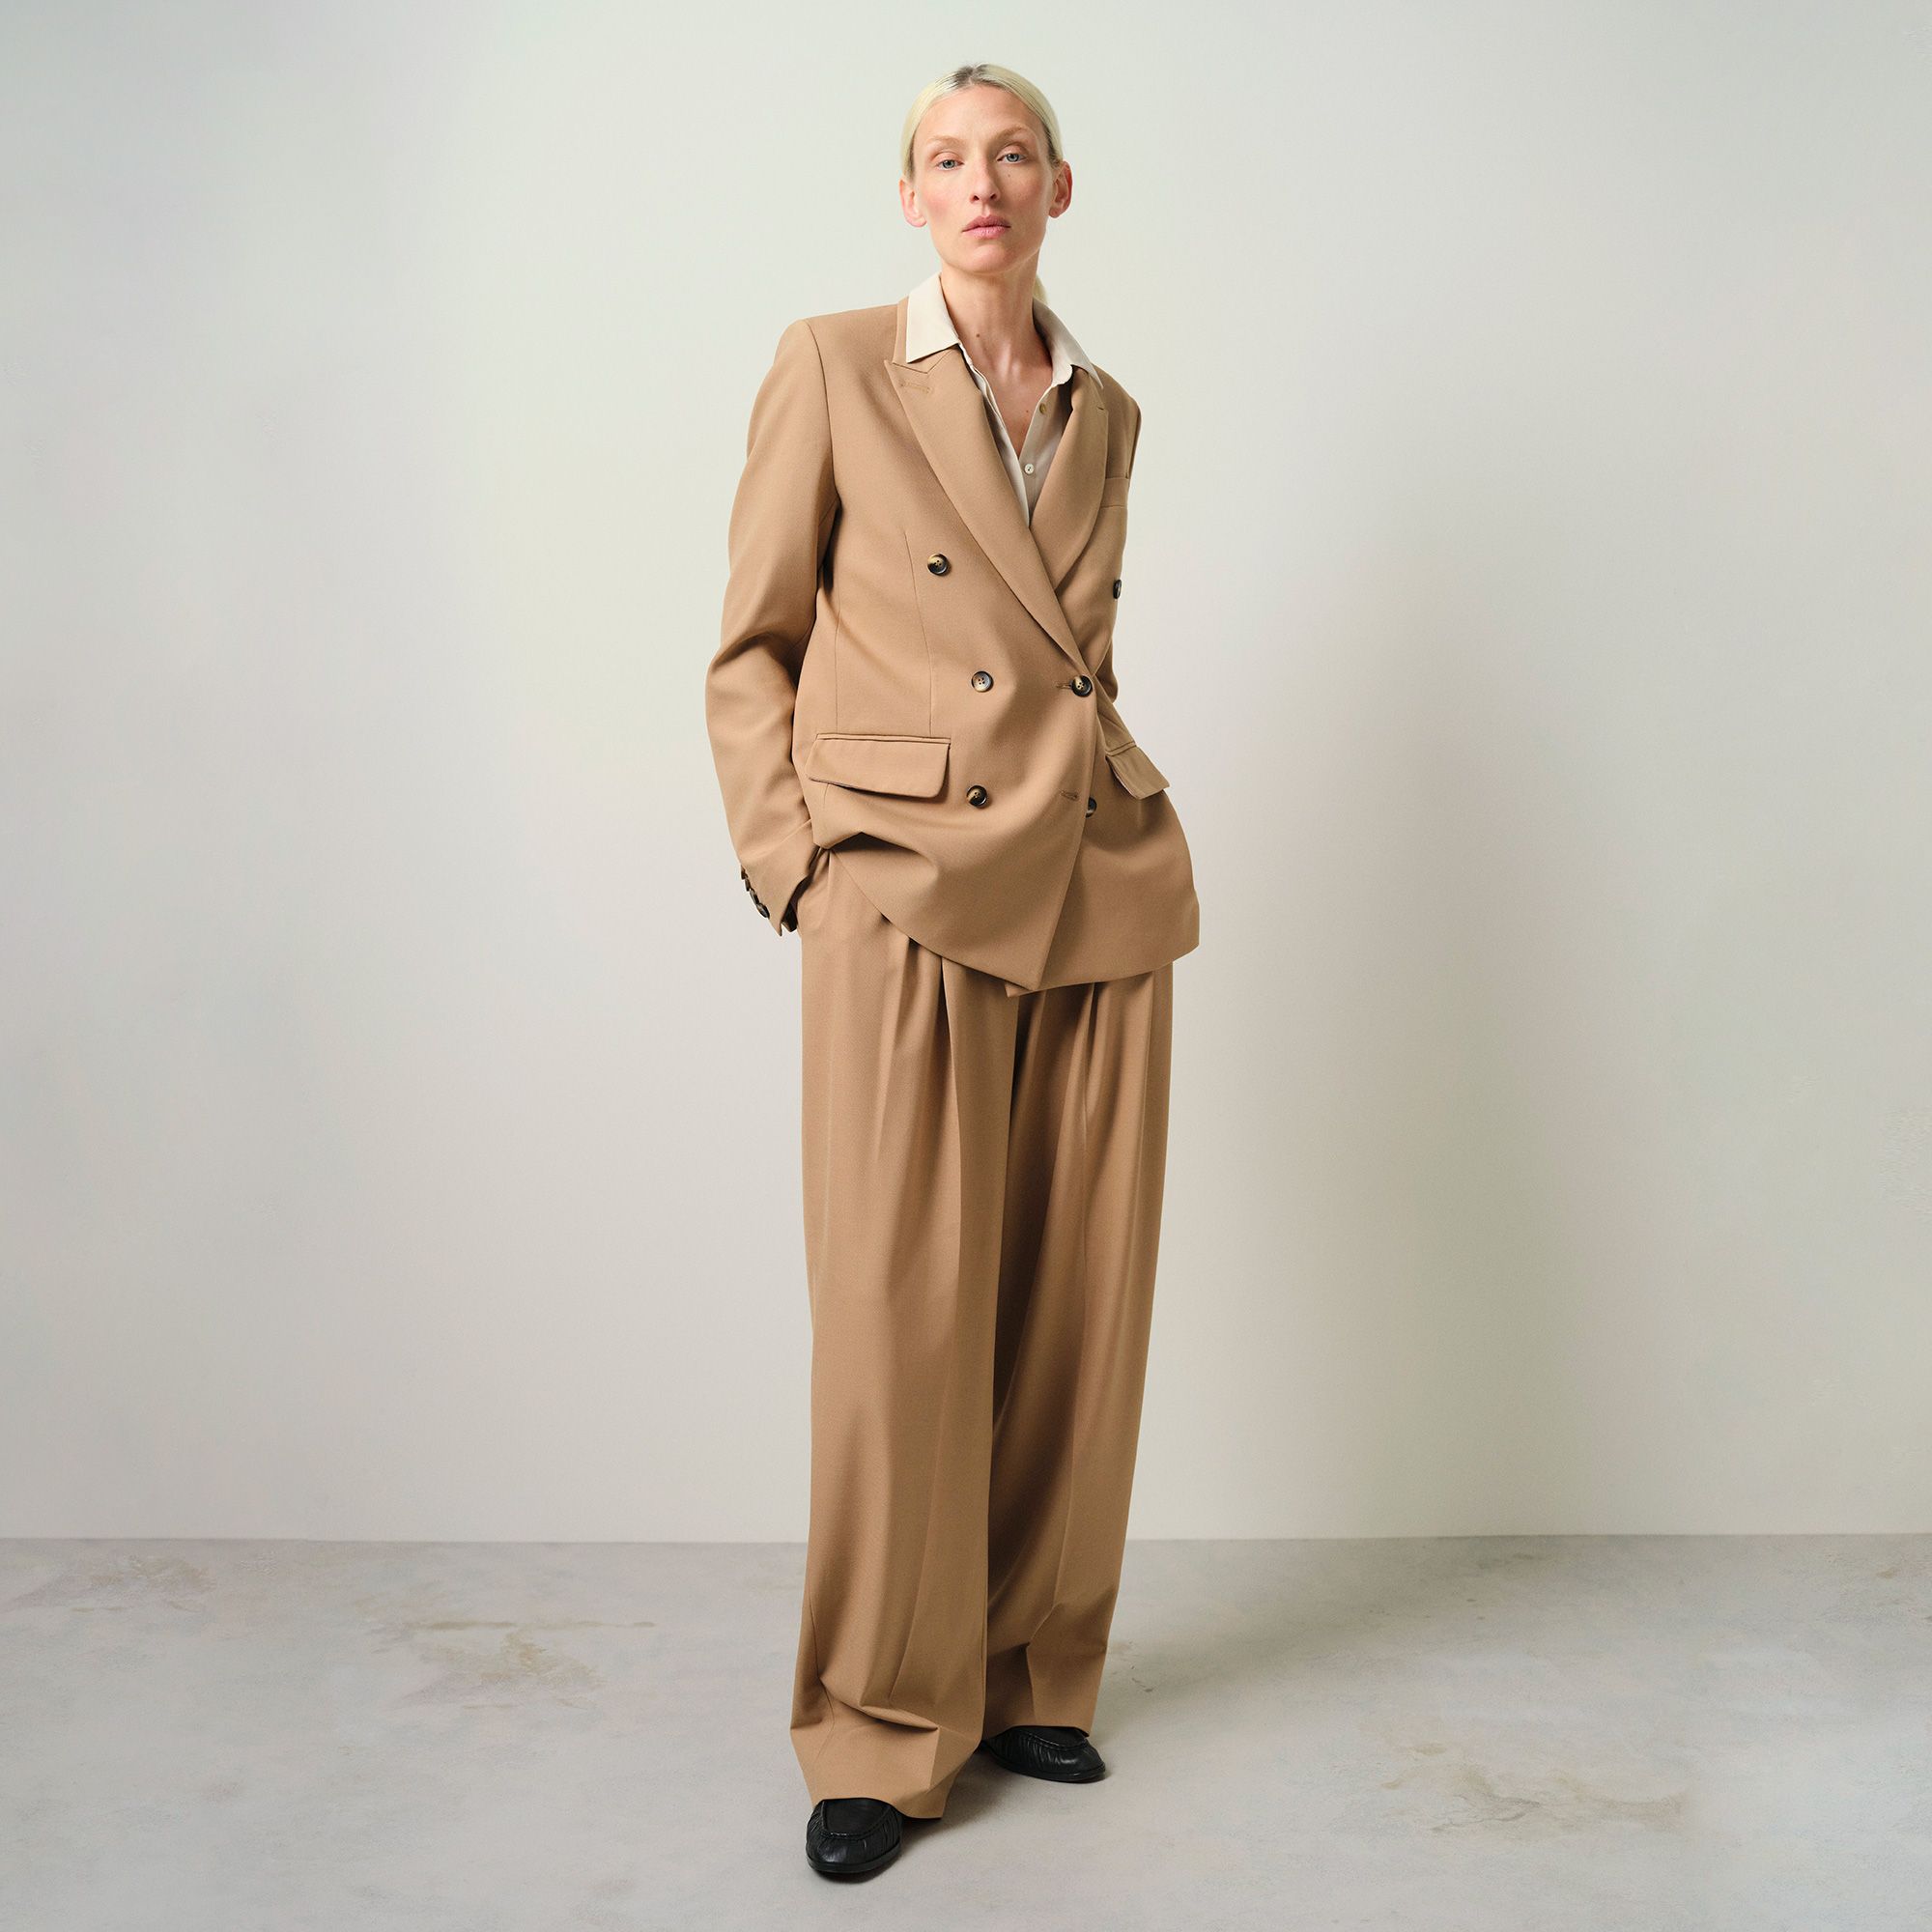 Image of a lady in a beige suit